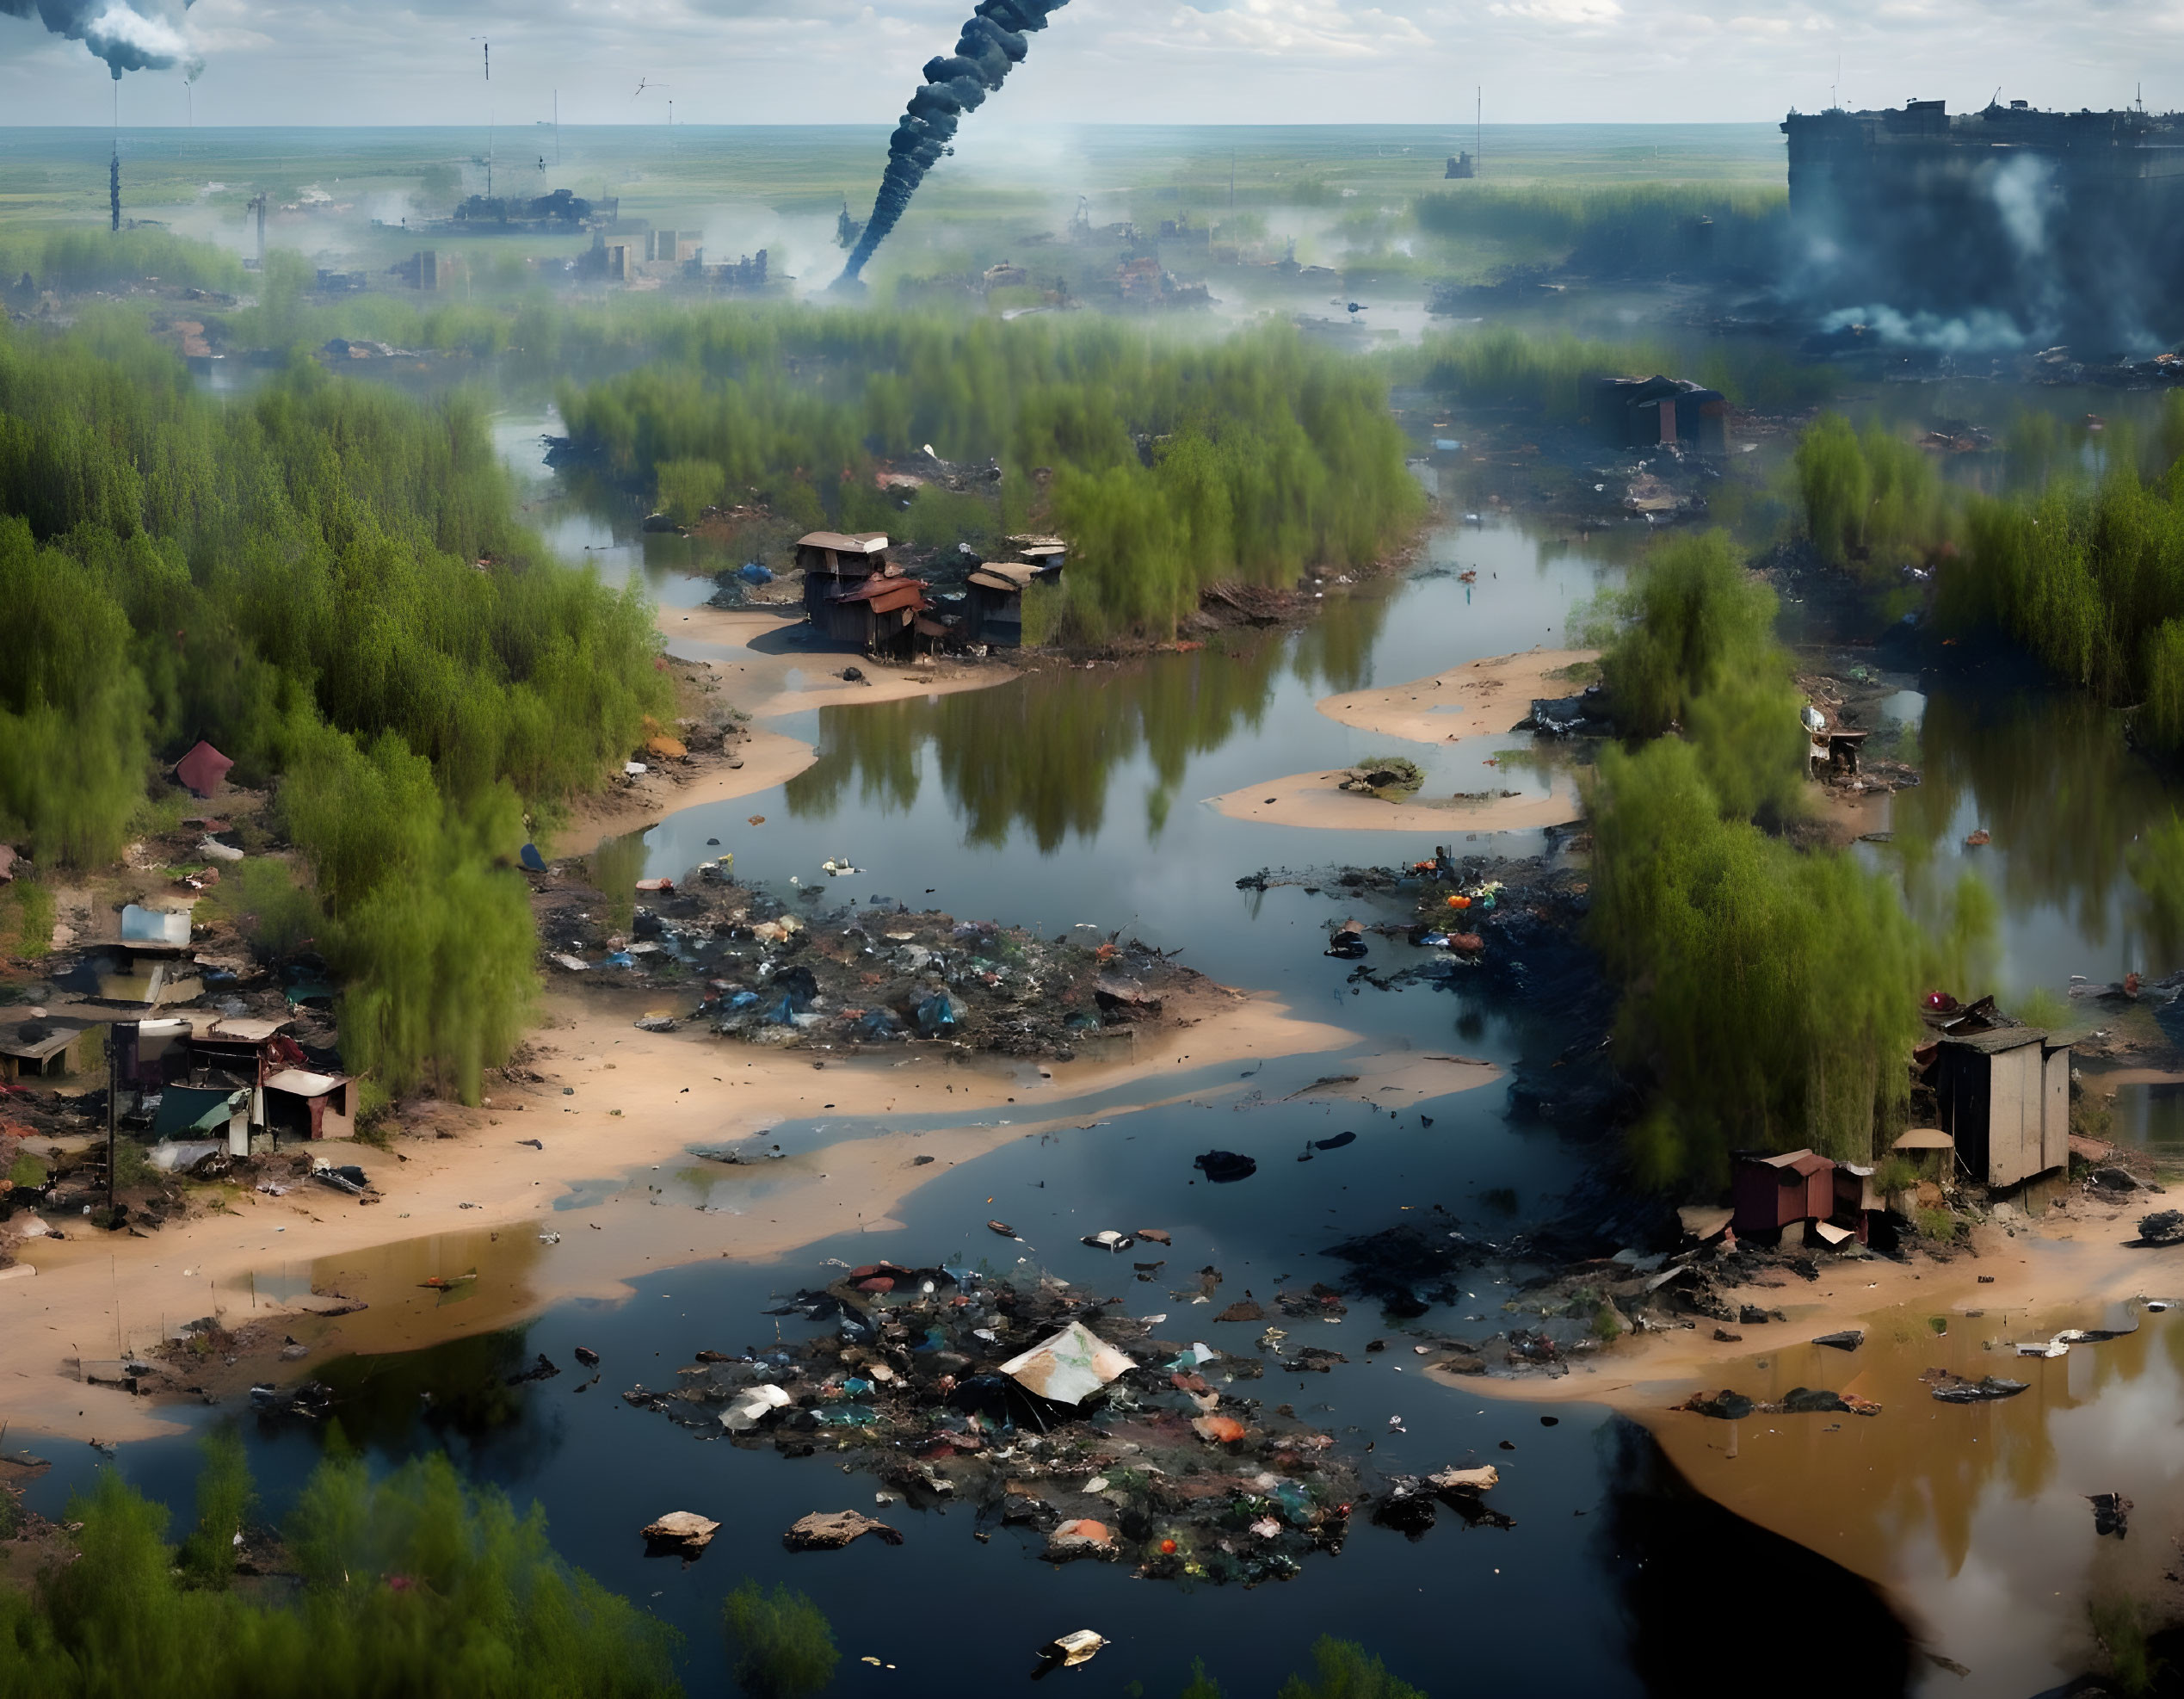 Polluted waterway with debris, dilapidated structures, greenery, and smokestacks